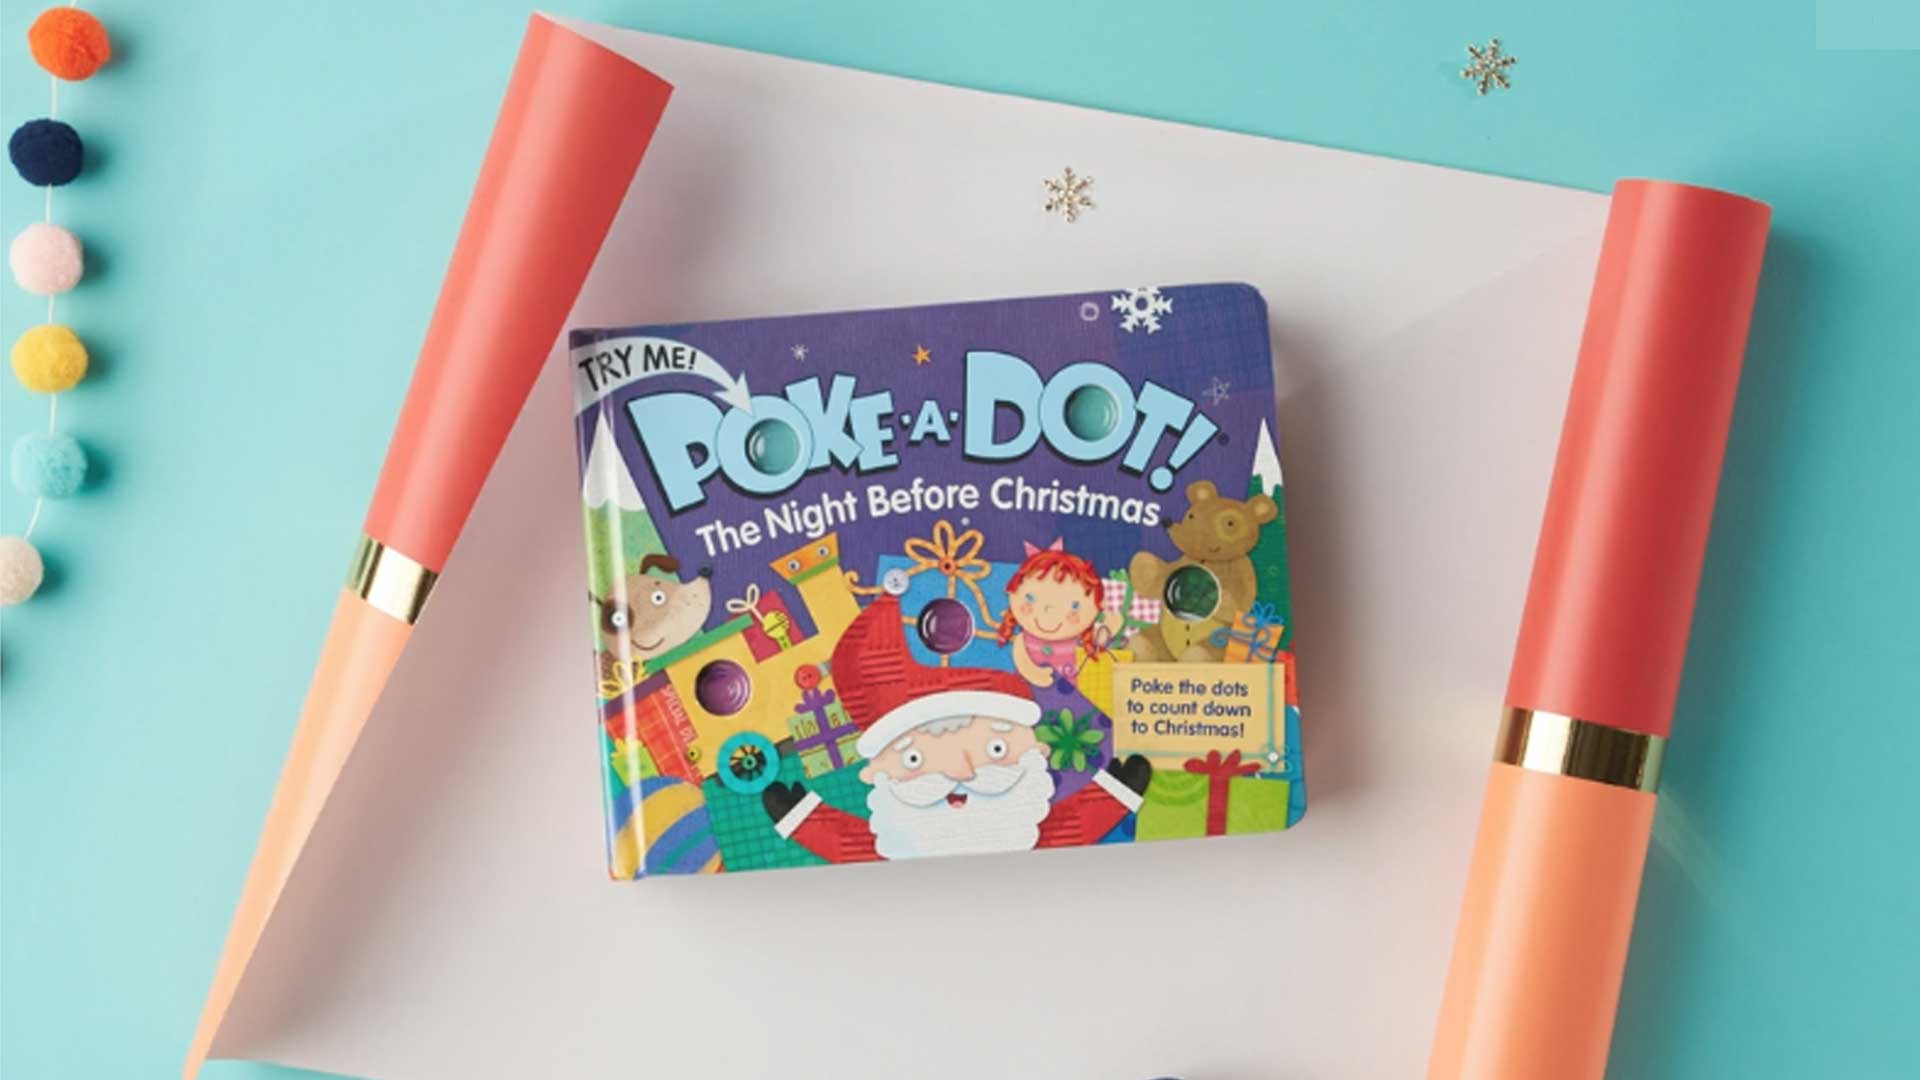 Commercial studio product photography and video production in Westchester, New York for Poke a Dot book gift wrapped